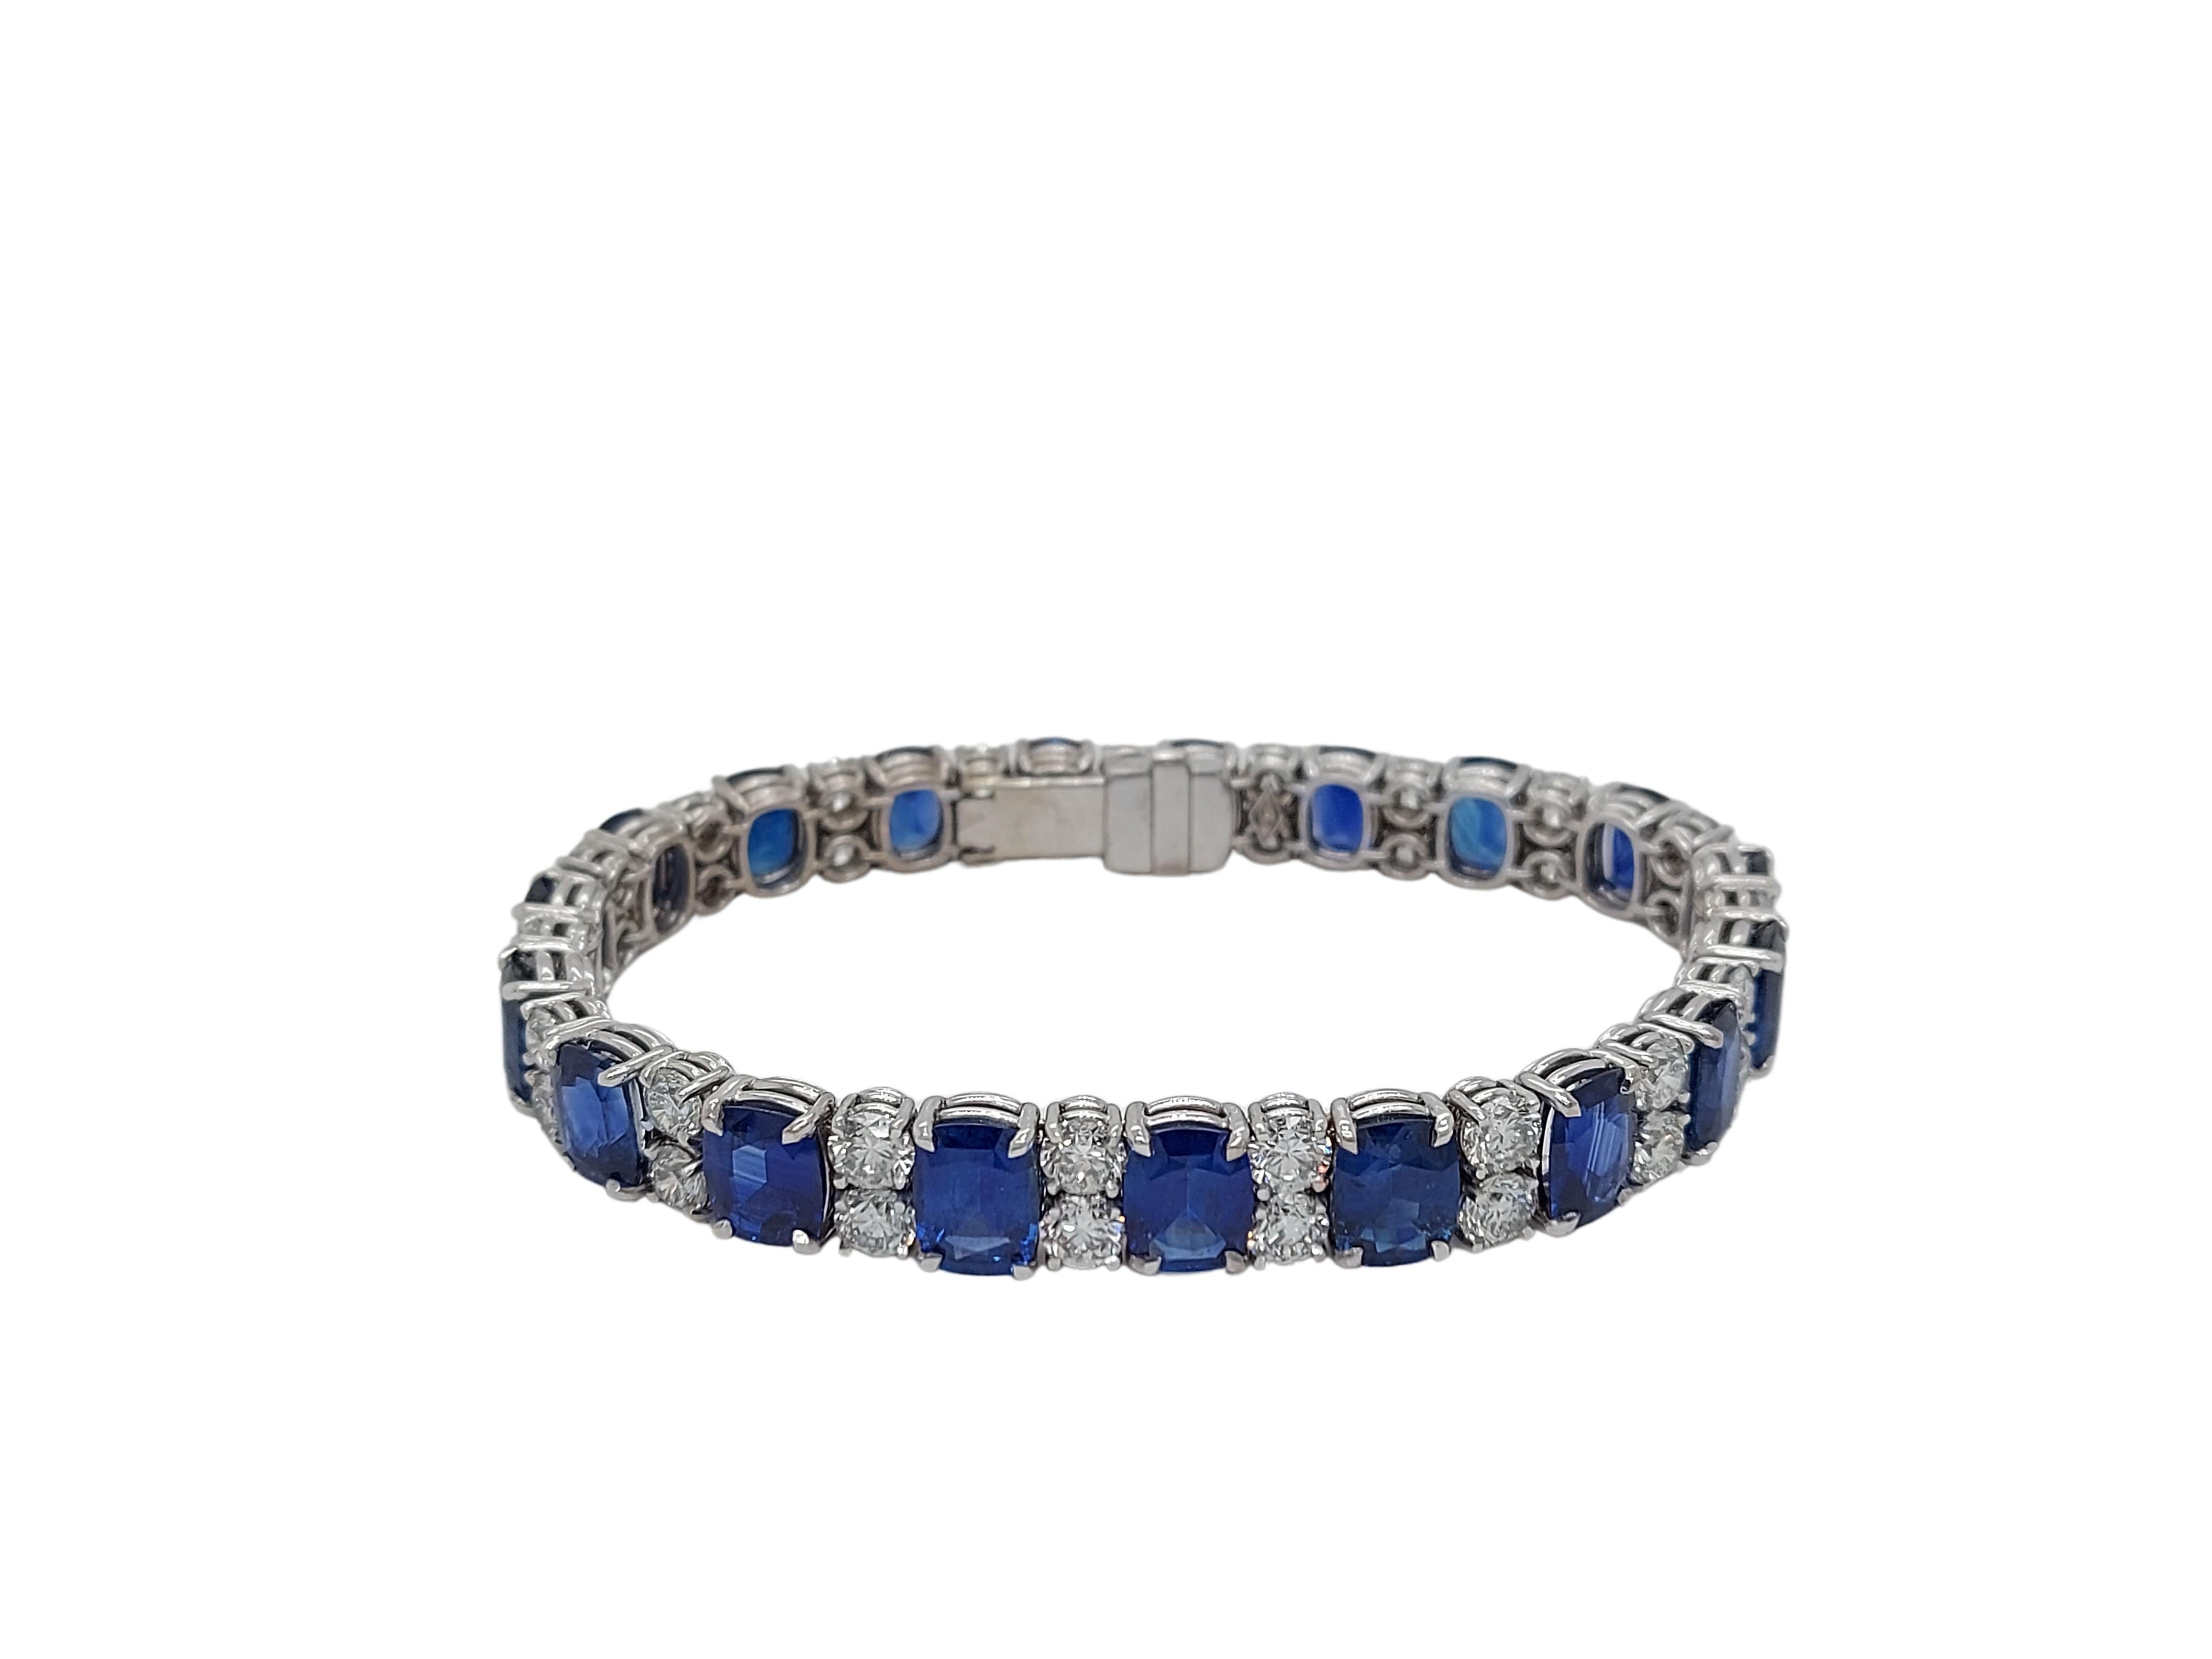 Cushion Cut 18kt White Gold Bracelet  27.33ct Sapphires, 9ct Diamonds, CGL Certificated For Sale